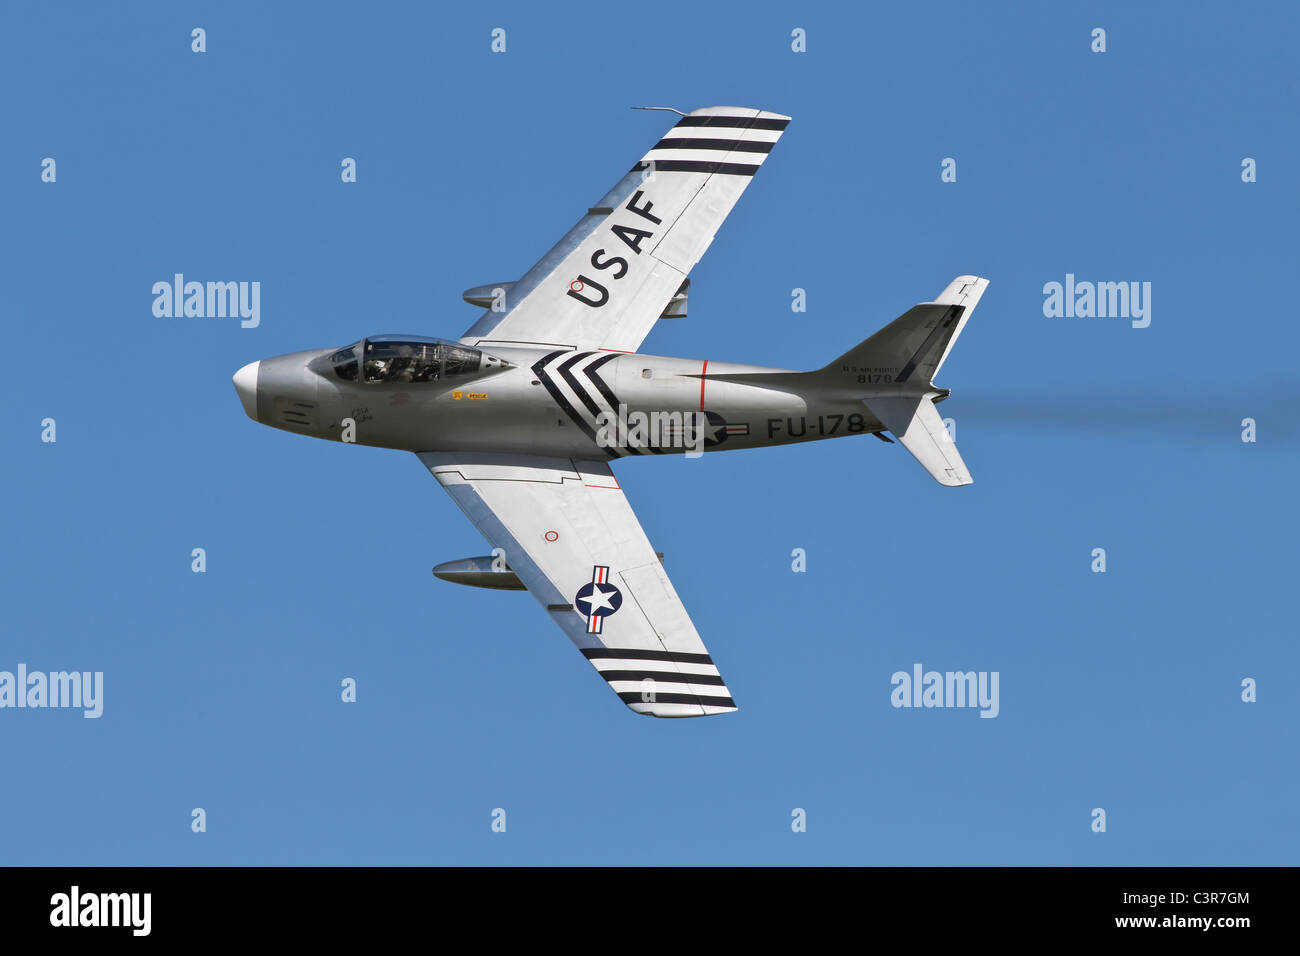 A classic veteran jet fighter of the USAF - The North American F86 Sabre fighter in flight Stock Photo